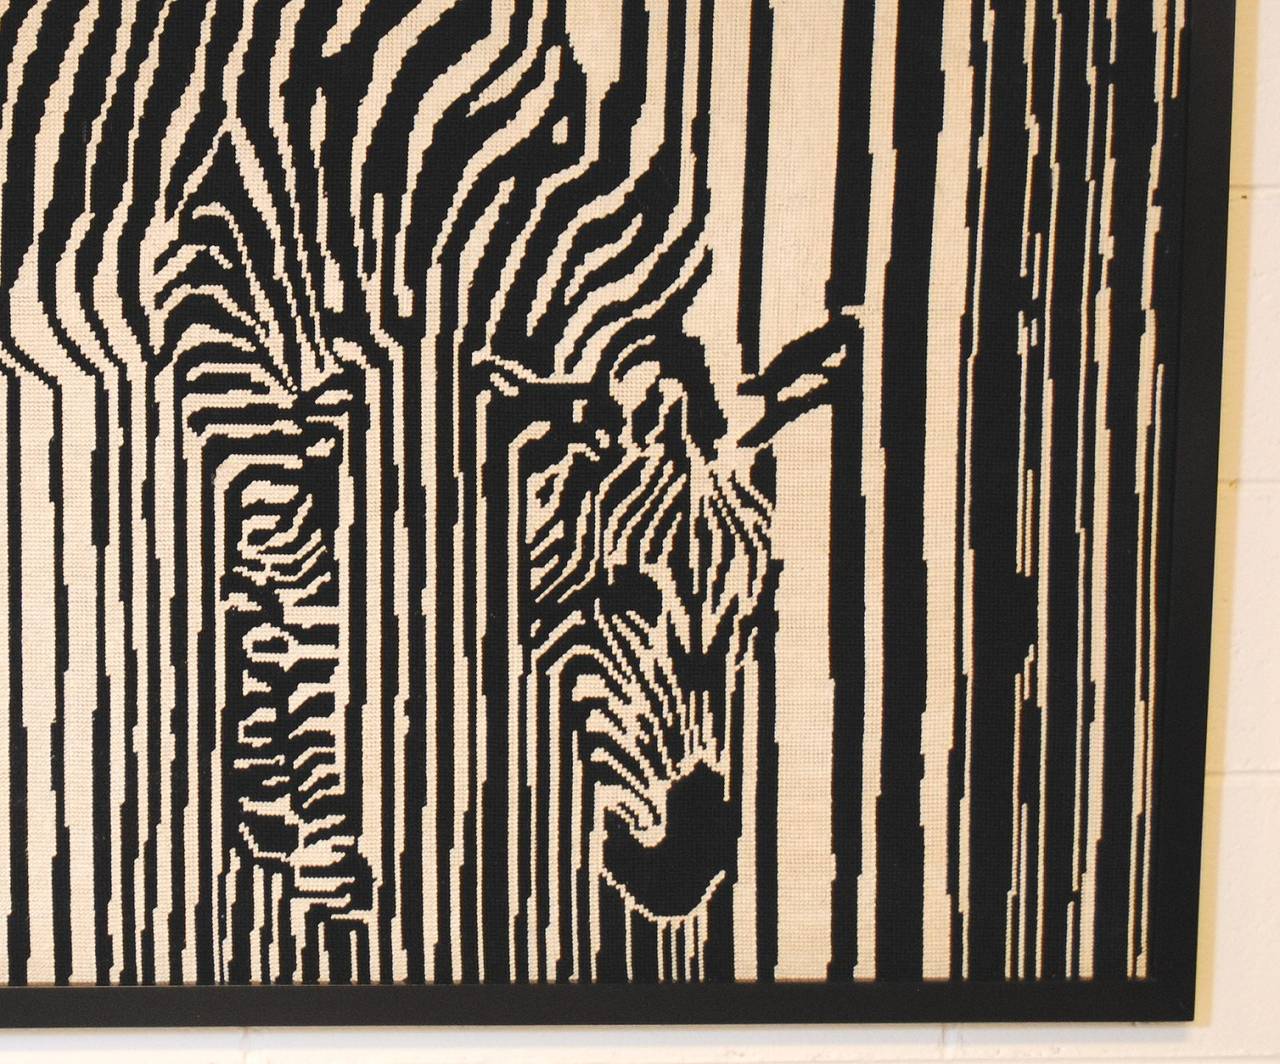 Framed vintage tapestry of a zebra from the 1960s.